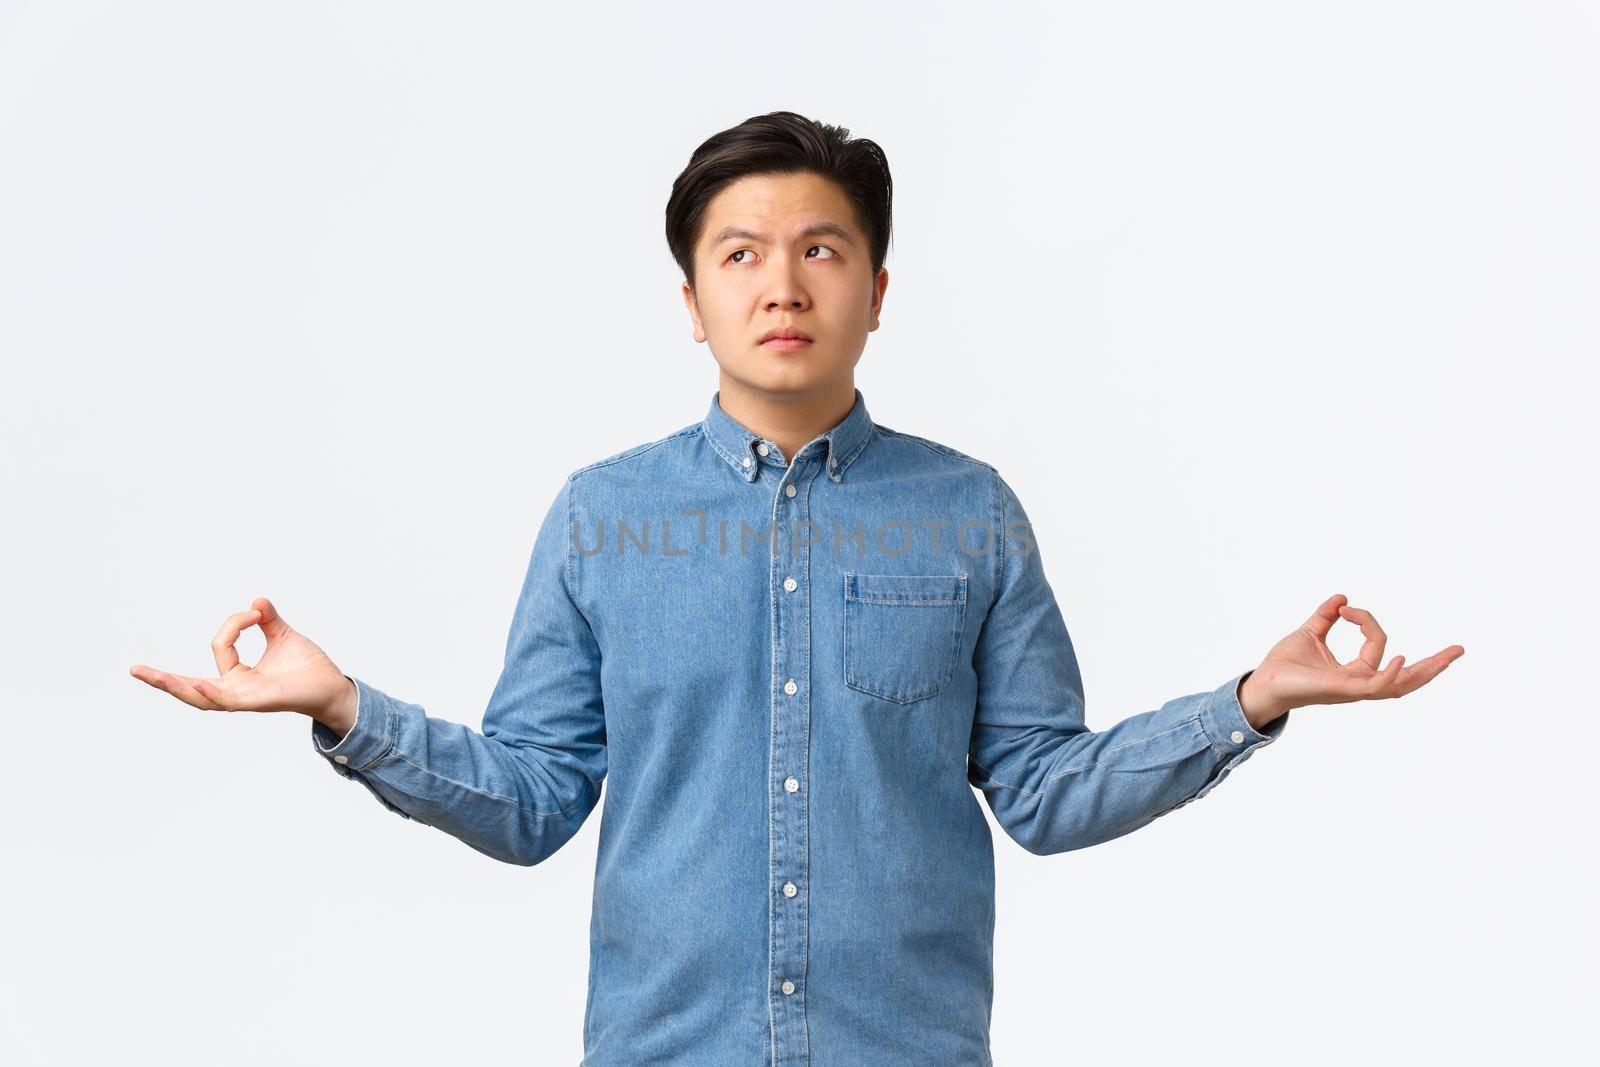 Uneasy and concerned asian man looking away thoughtful, overthinking as trying to meditate and calm down, spread hands sideways in zen gesture, doing yoga, cant focus, white background.